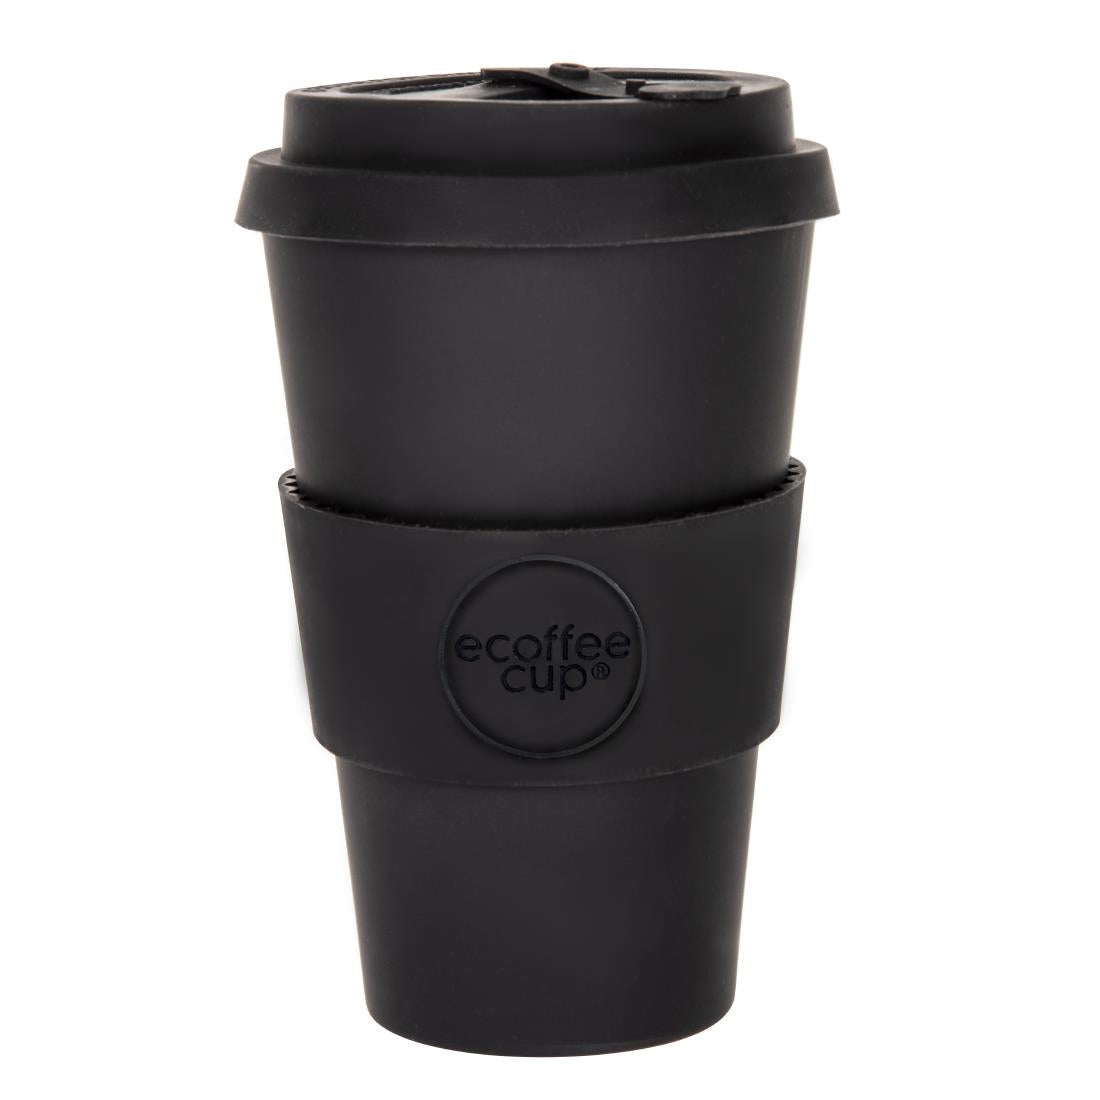 DY493 ecoffee Cup Reusable Coffee Cup Kerr & Napier Black 14oz JD Catering Equipment Solutions Ltd